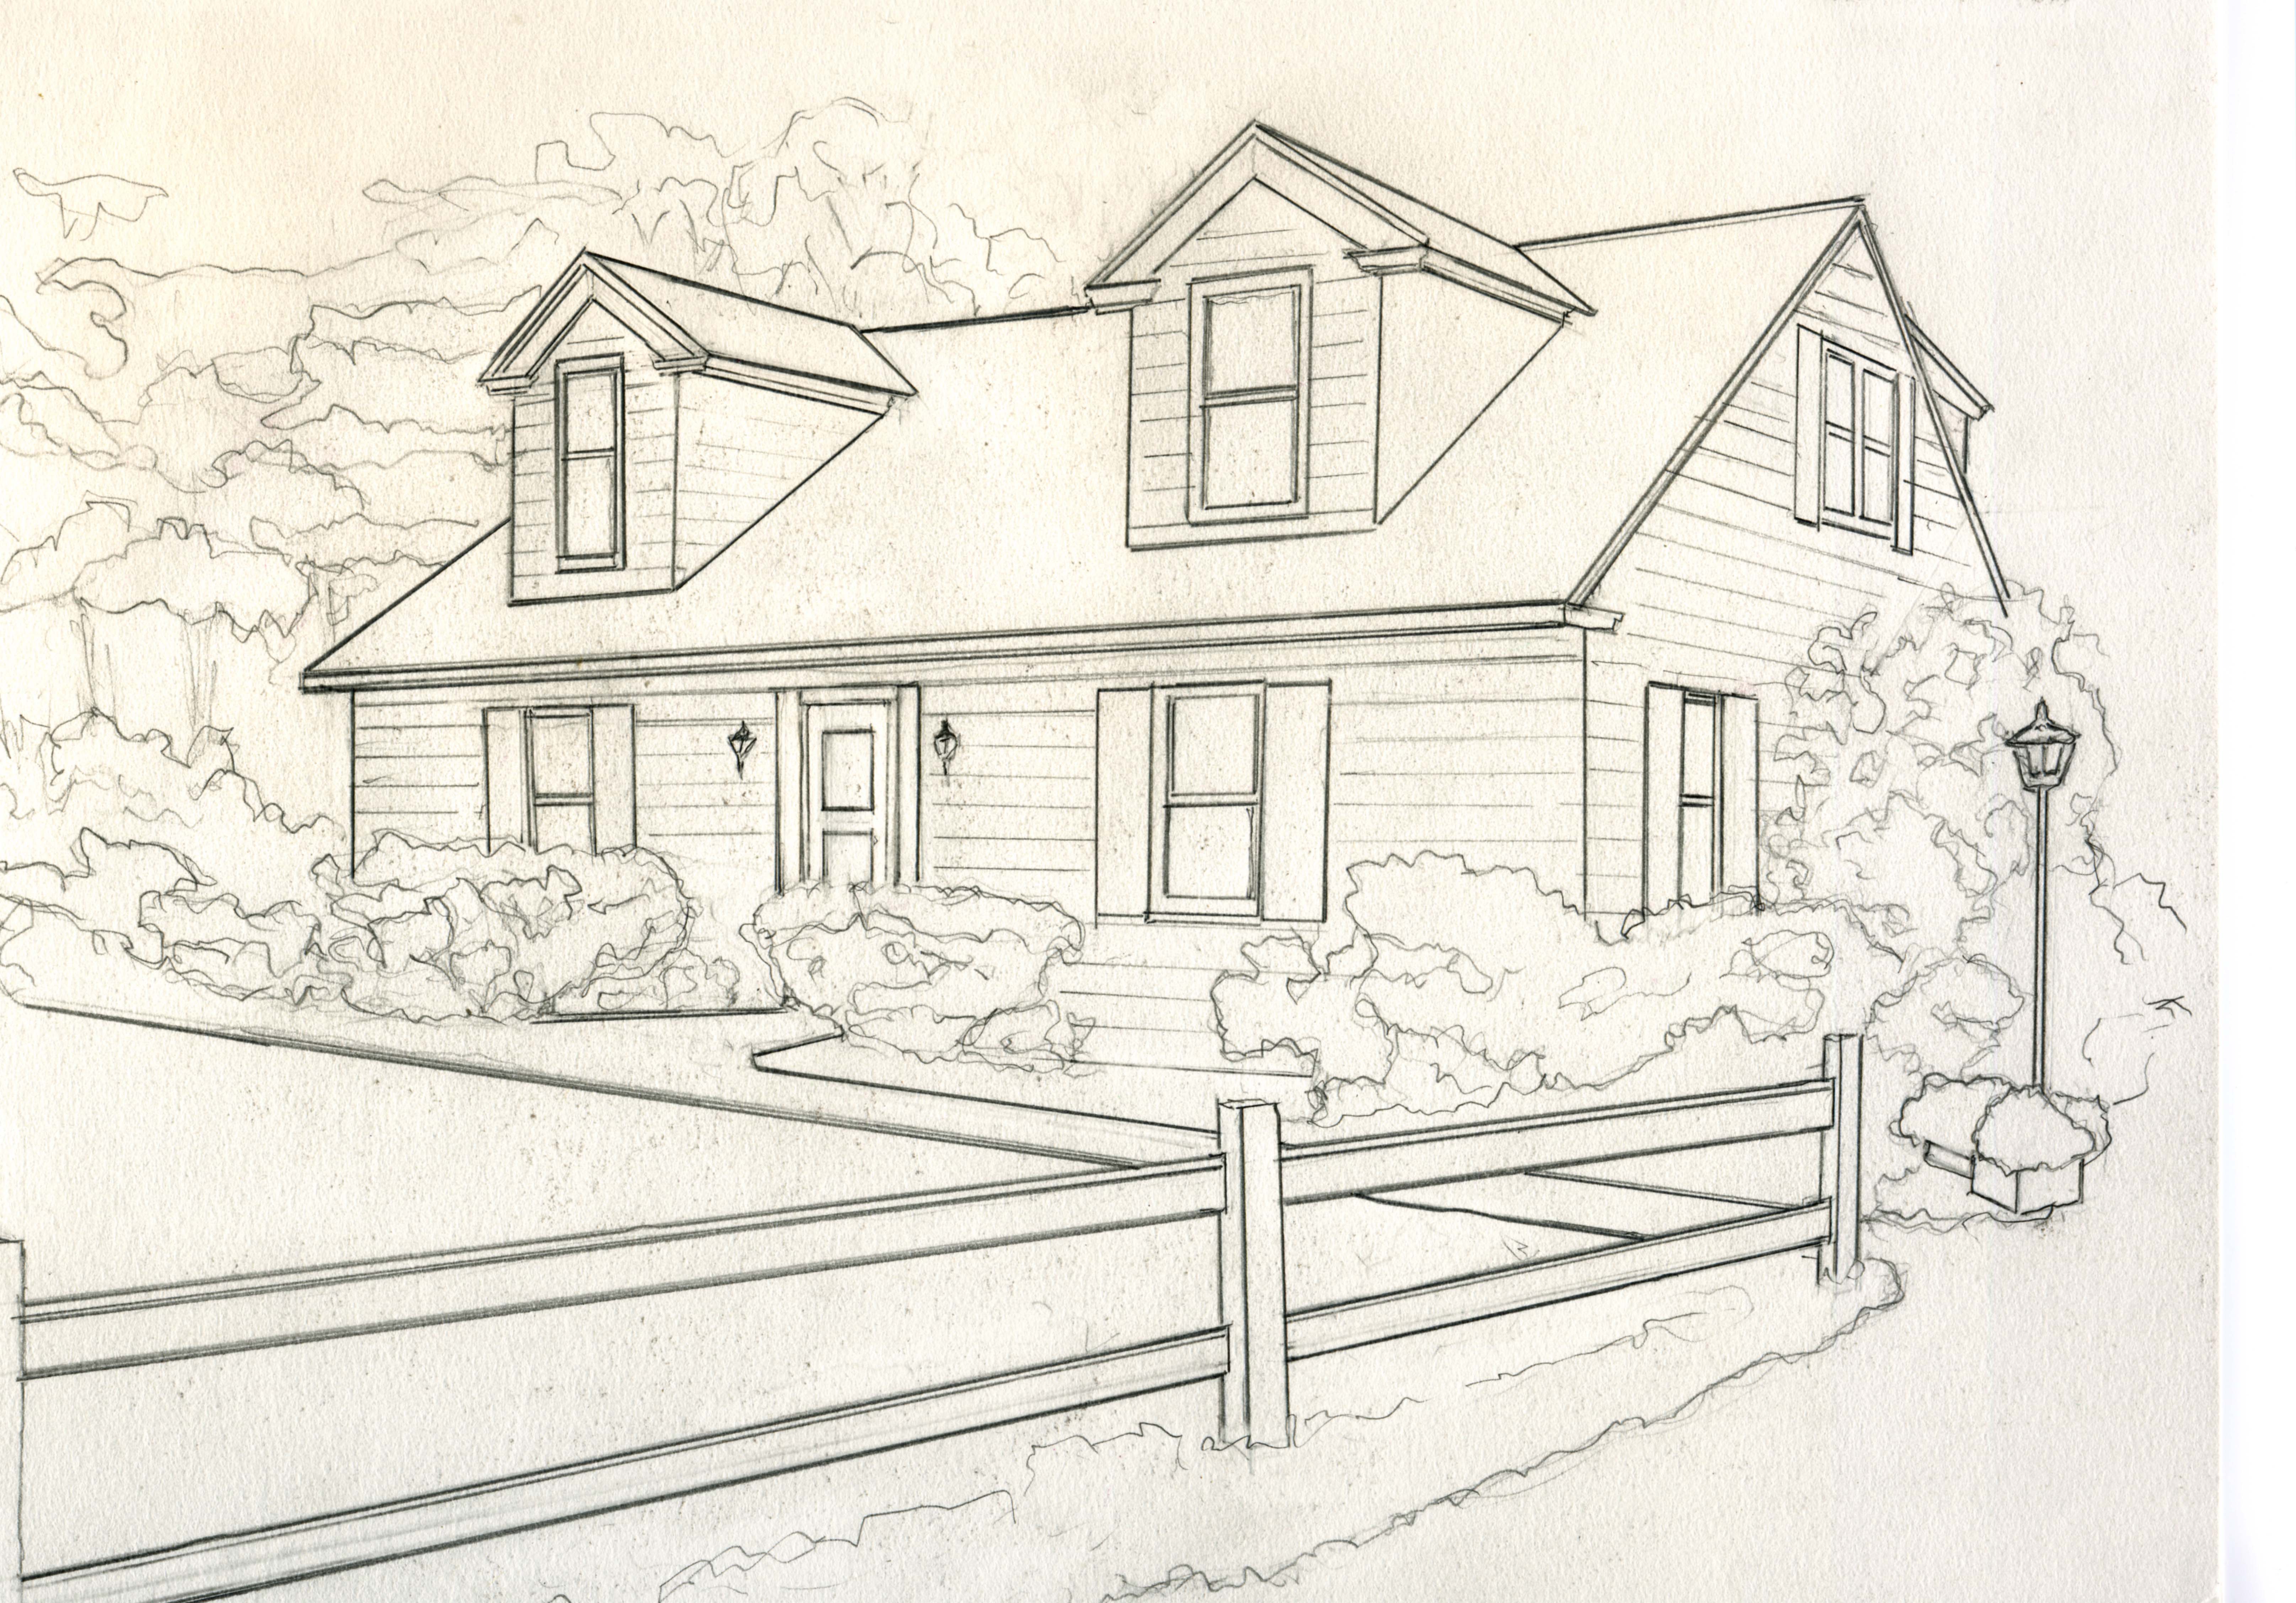 House Perspective Drawing At Getdrawings Com Free For